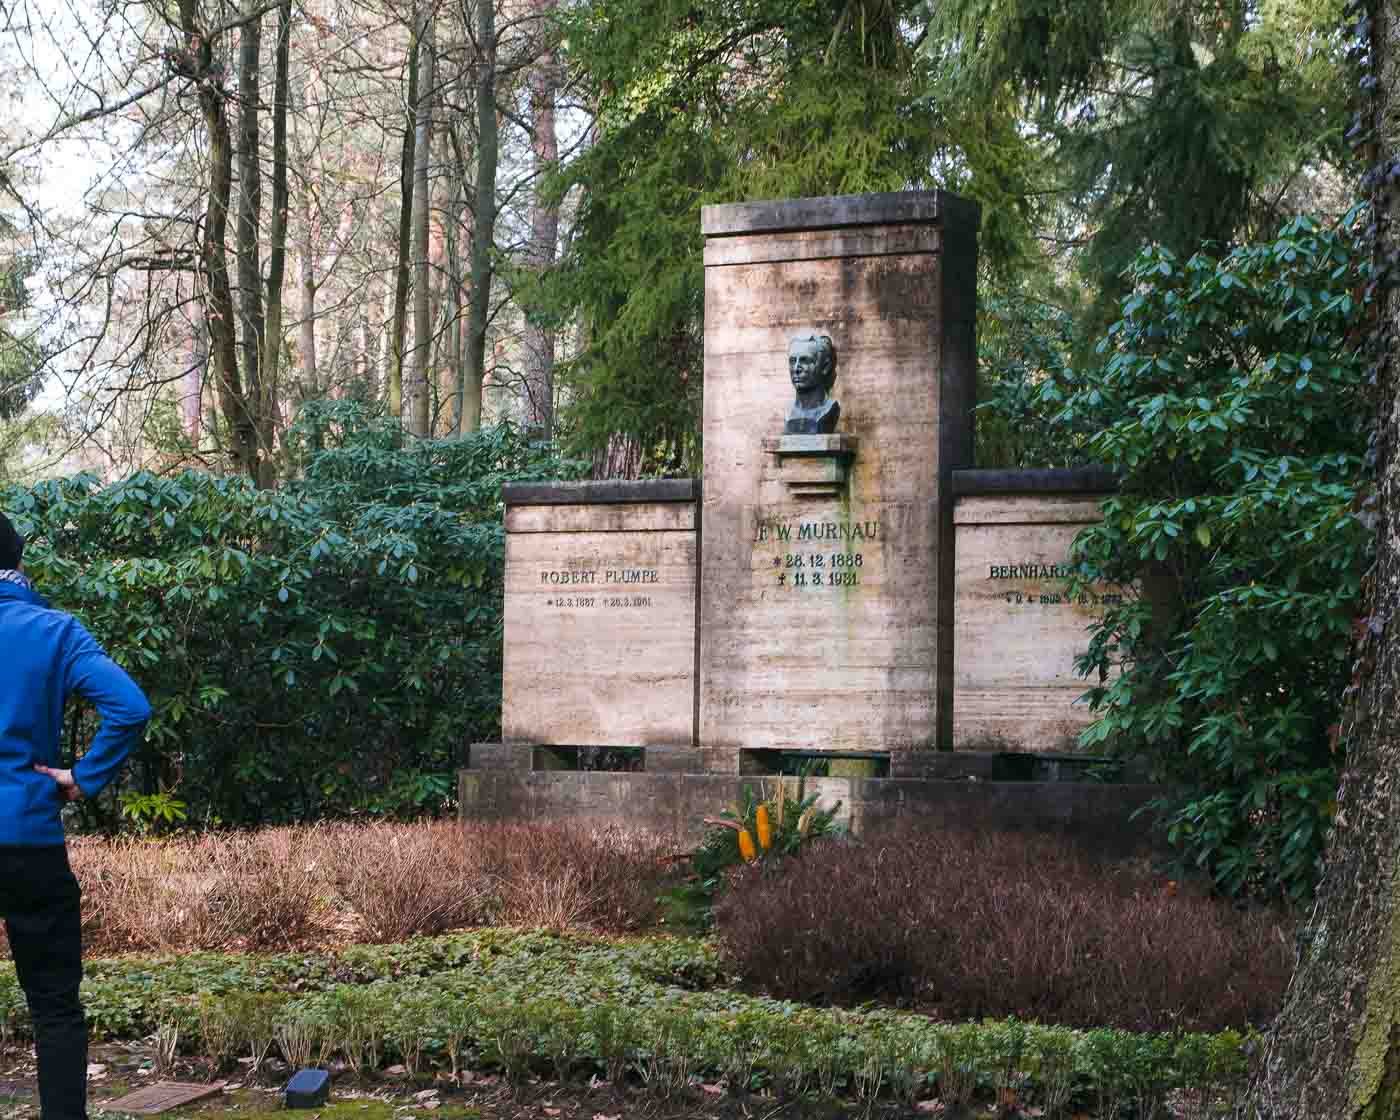 However, the story doesn't end there. In July 2015, Murnau's final resting place in Stahnsdorf South-Western Cemetery was desecrated in an unusual set of circumstances. His skull was stolen, and although wax residue found at the scene hinted at a possible occult motive, the perpetrators and their intentions remain shrouded in mystery. This macabre incident has cast a shadow over the legacy of one of cinema's most visionary figures, leaving an enduring question mark alongside his undeniable contributions to the art form. His skull has not been recovered since.